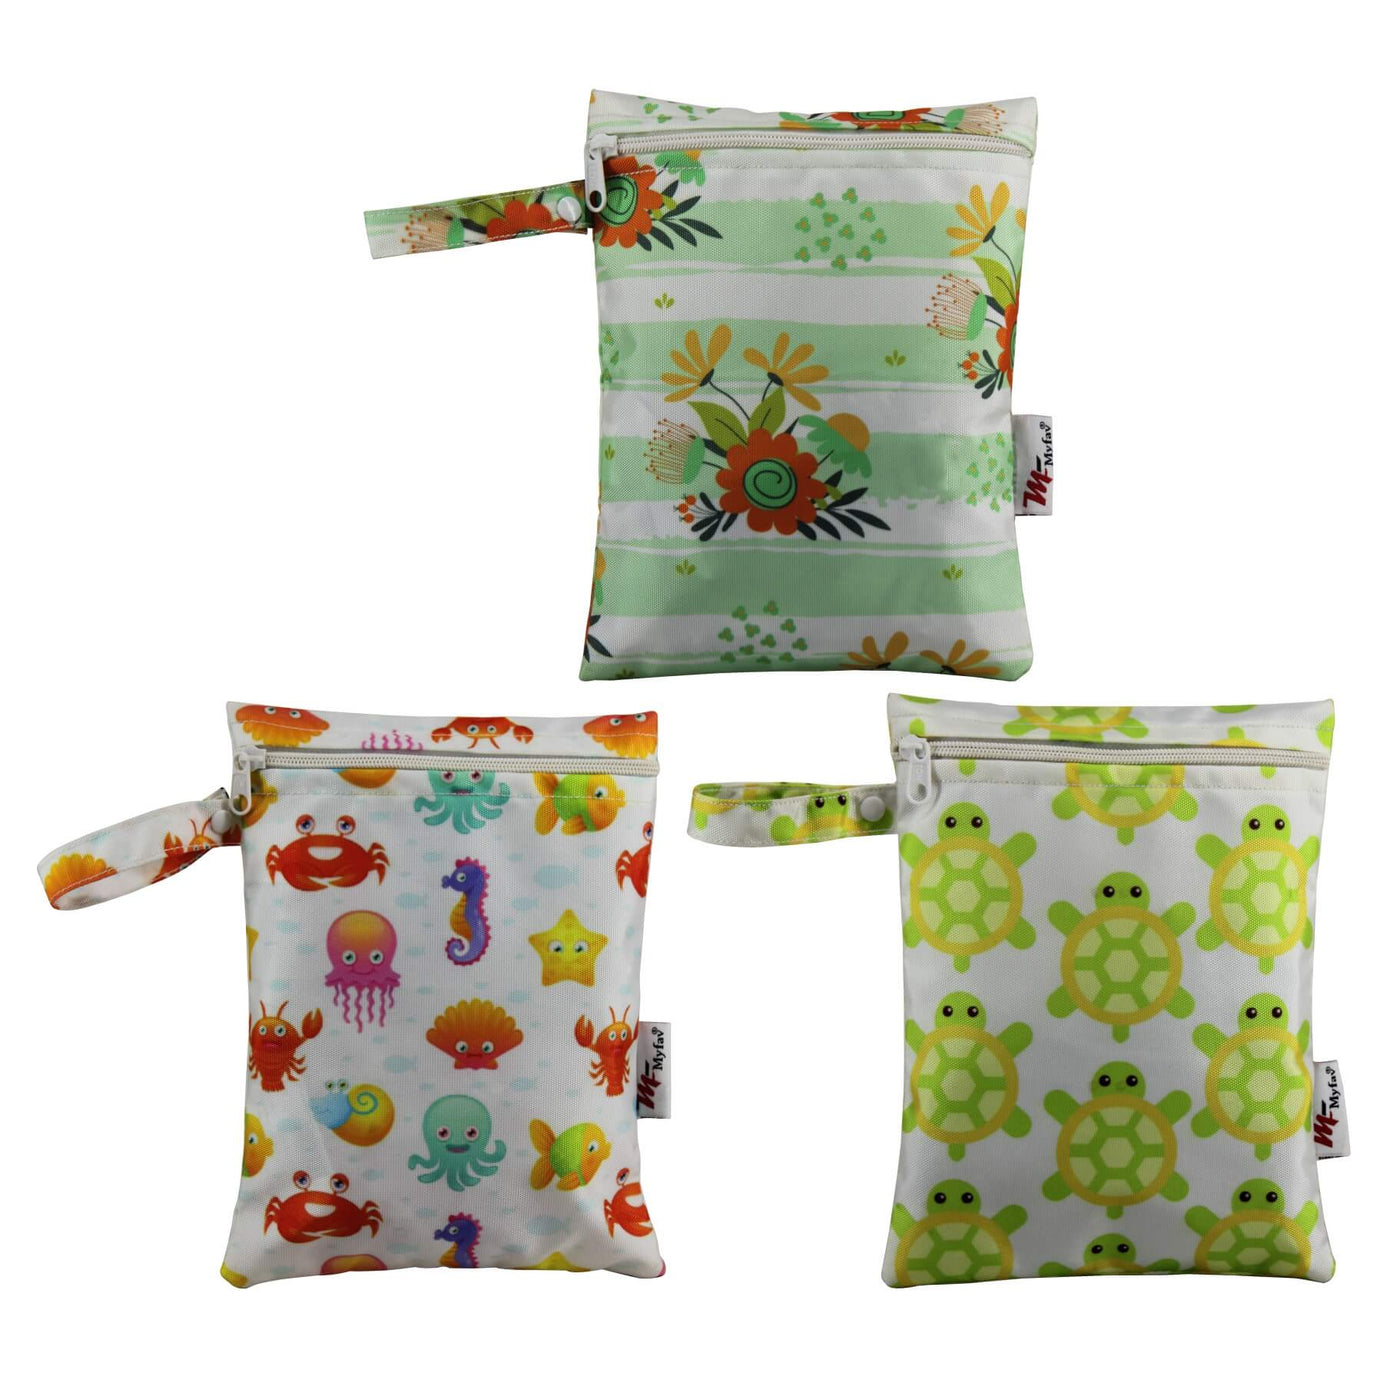 My Fav Digital Printed Multiutility Wet Dry Pouch/Diaper Bag/Travel Pouch/Travel Kit - Pack of 3